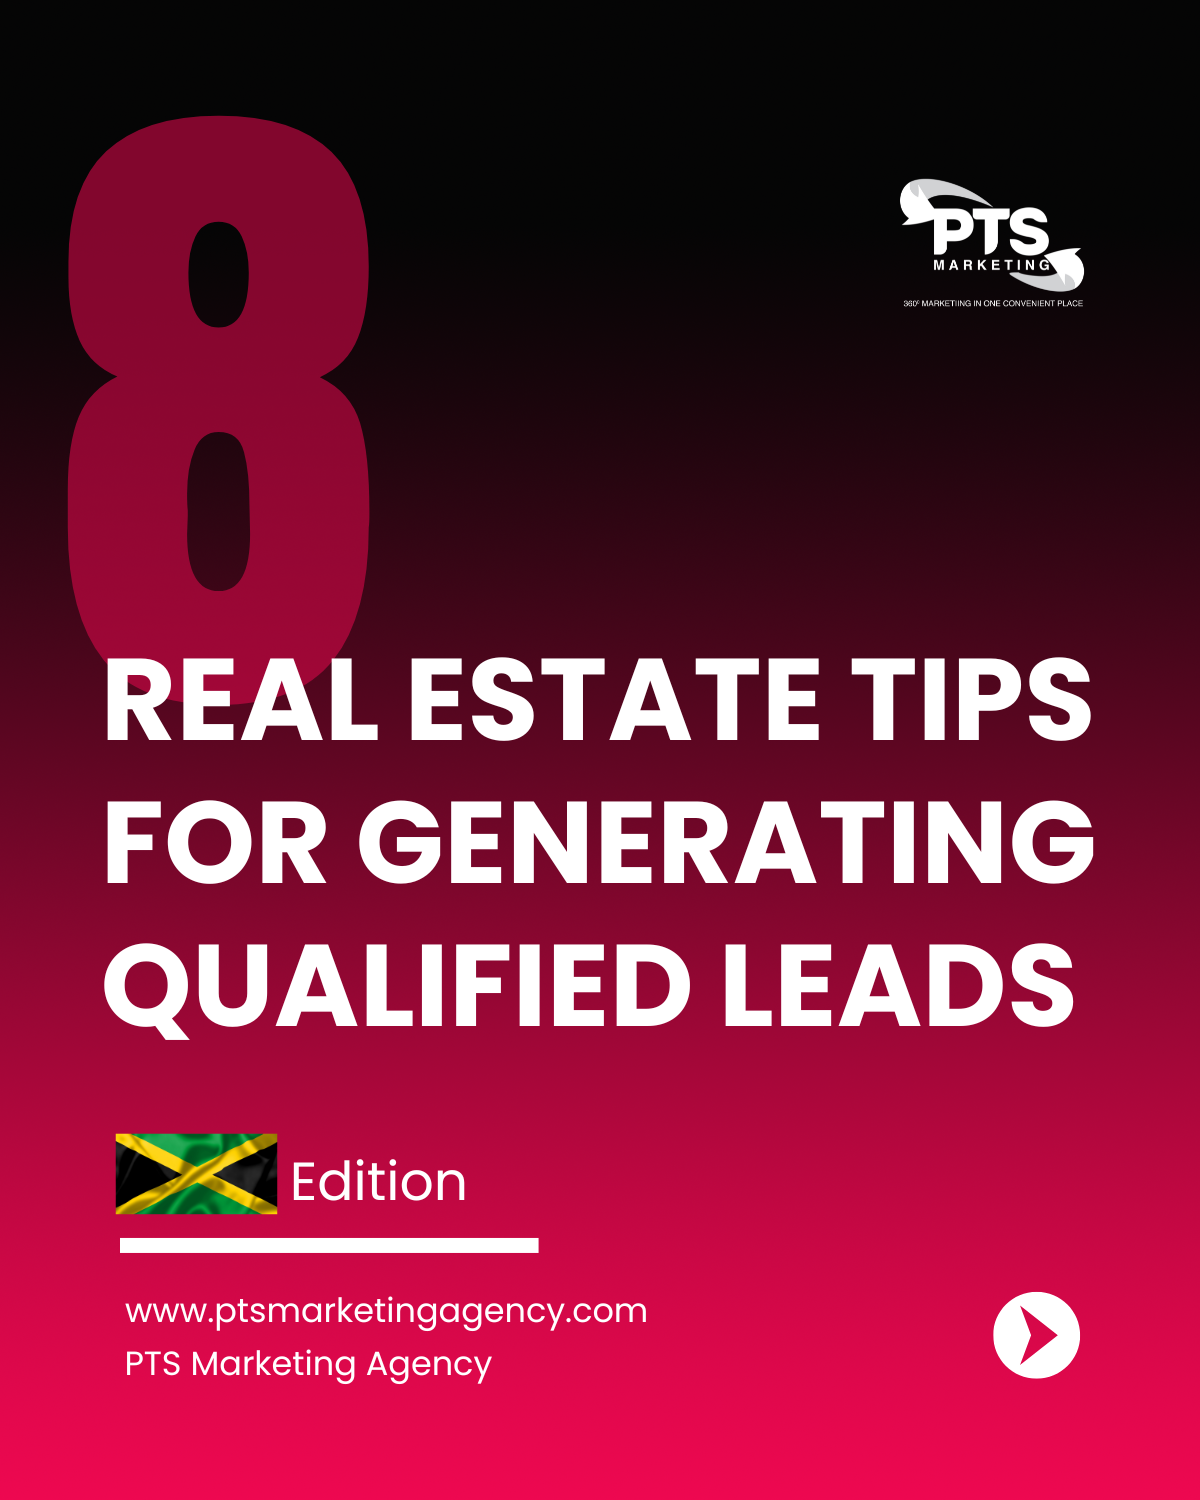 Get Real Estate Leads – 8 Tips for Generating Qualified Leads